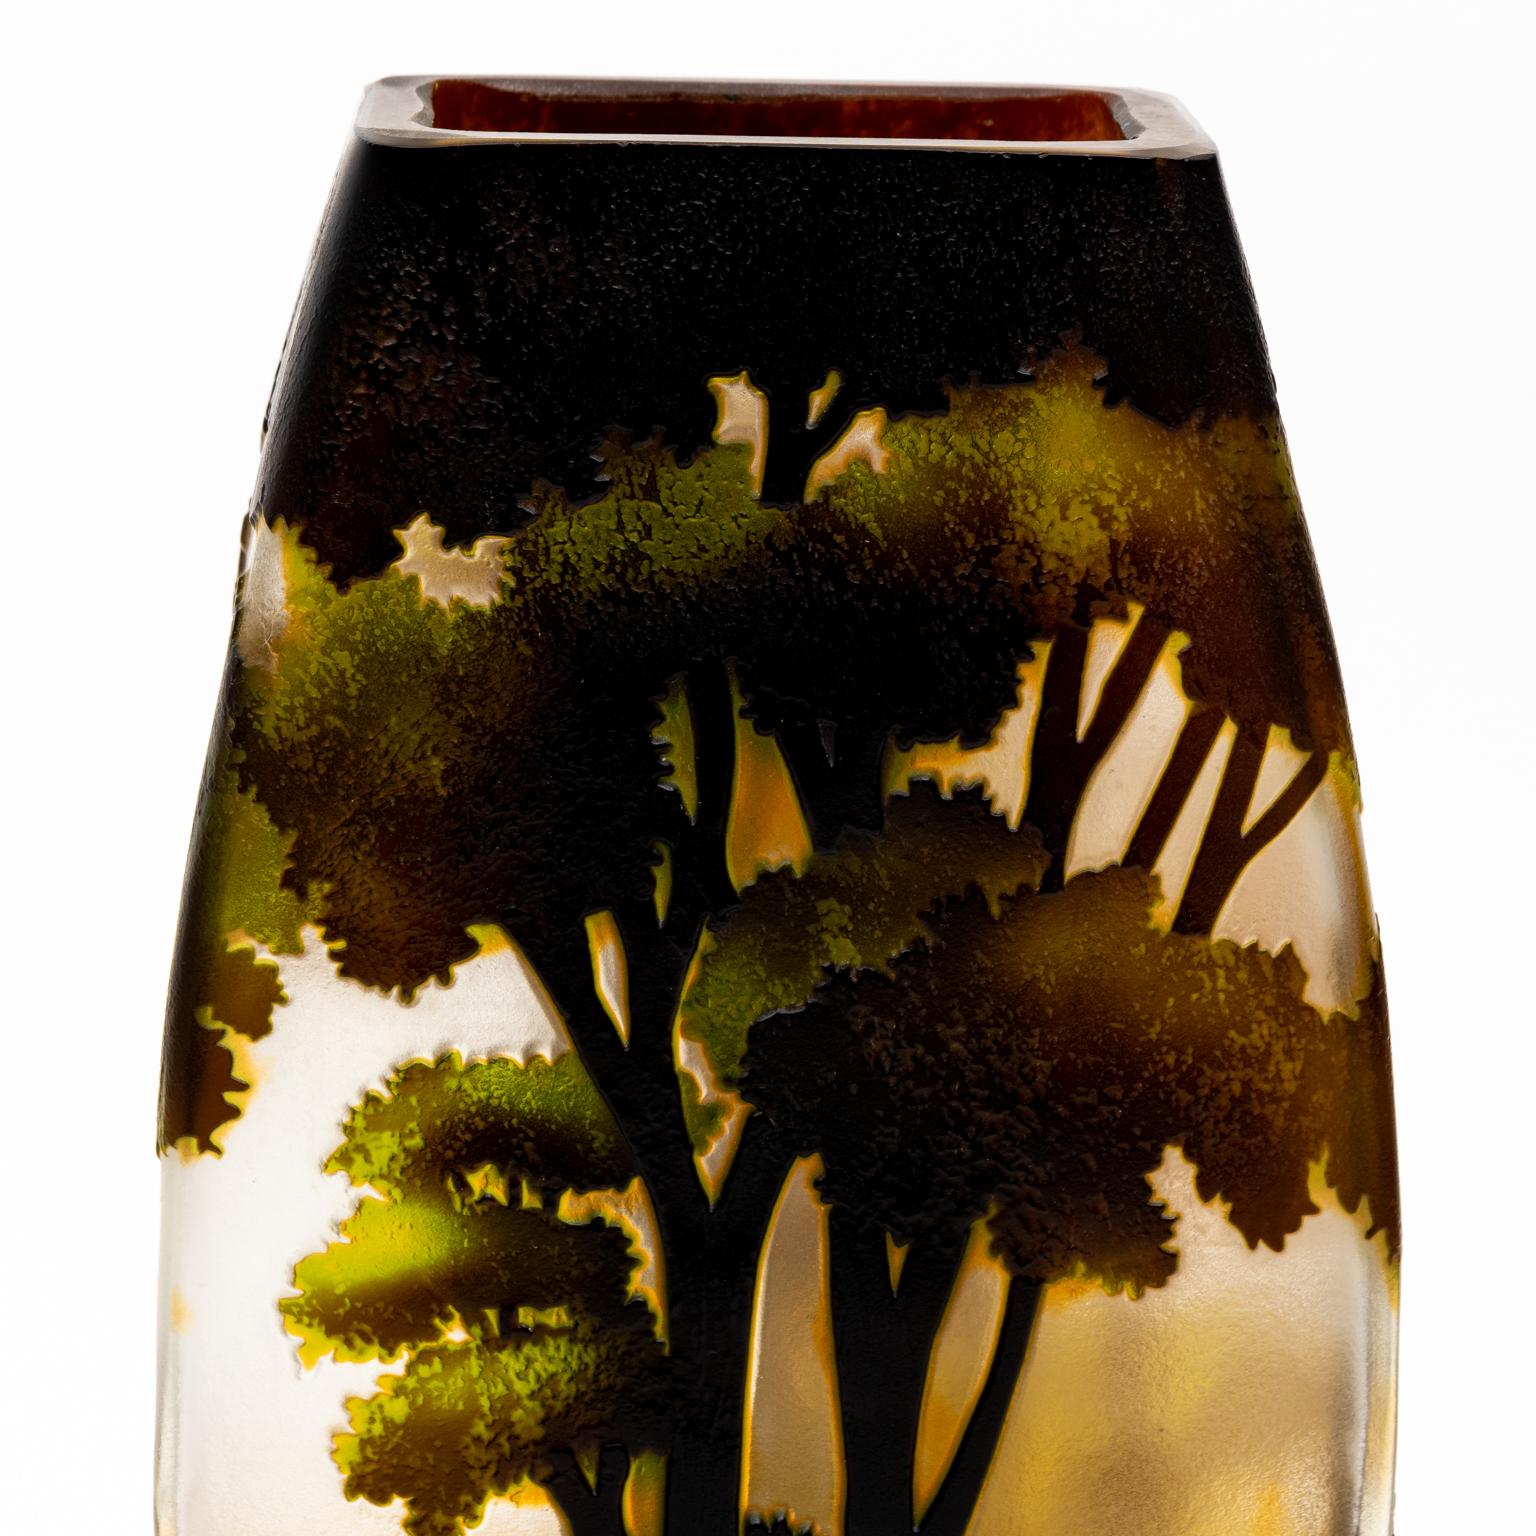 10 Inch vintage cameo glass vase in shades of green and grey with a forest scene that features lush tall trees. This four sided vase has fantastic color and looks better when lit. Please note of wear consistent with age, this vase is unmarked and